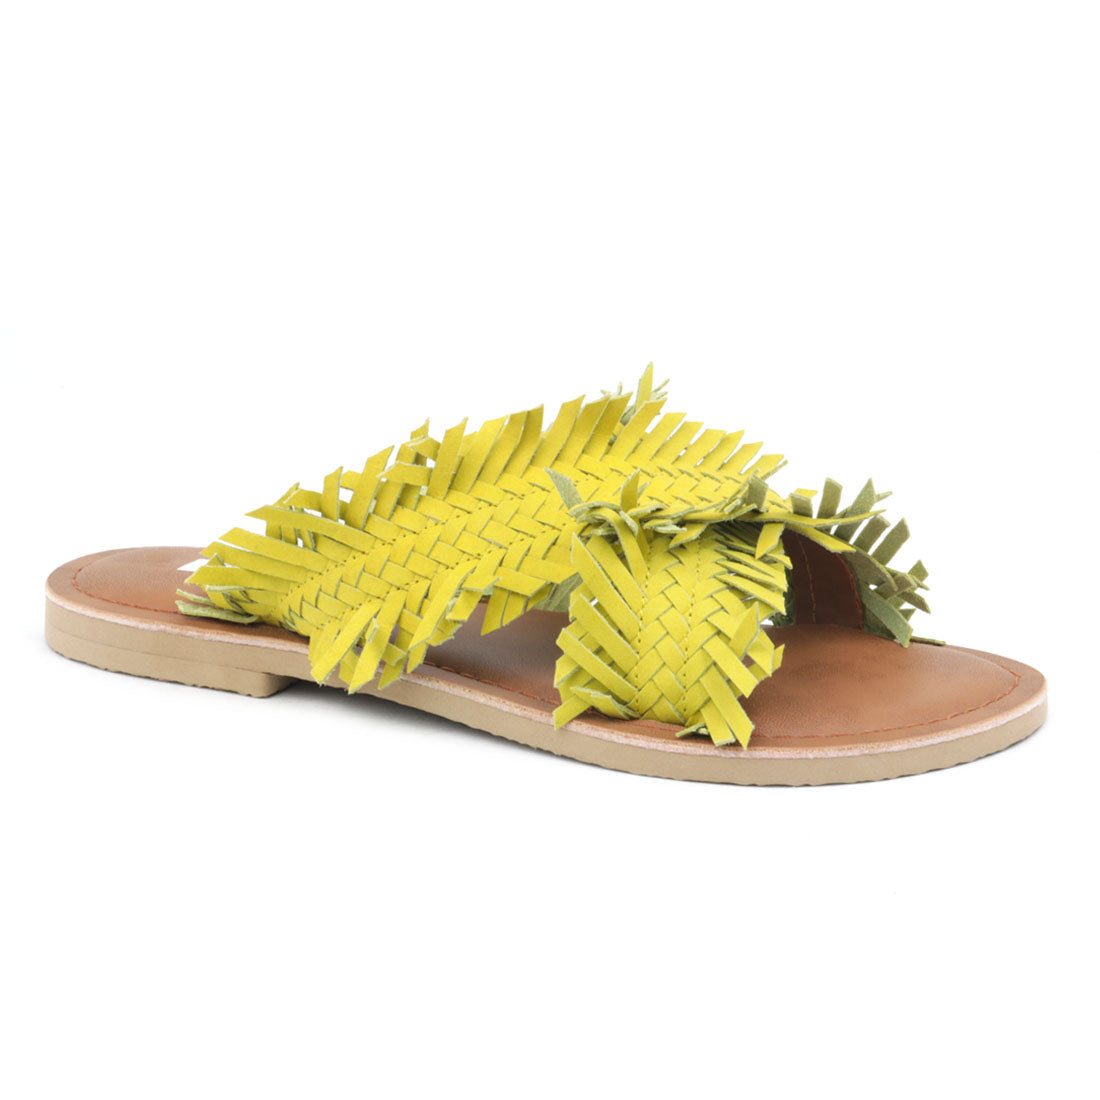 Origami Style Yellow Cross Strap Flat Sandals - Yellow